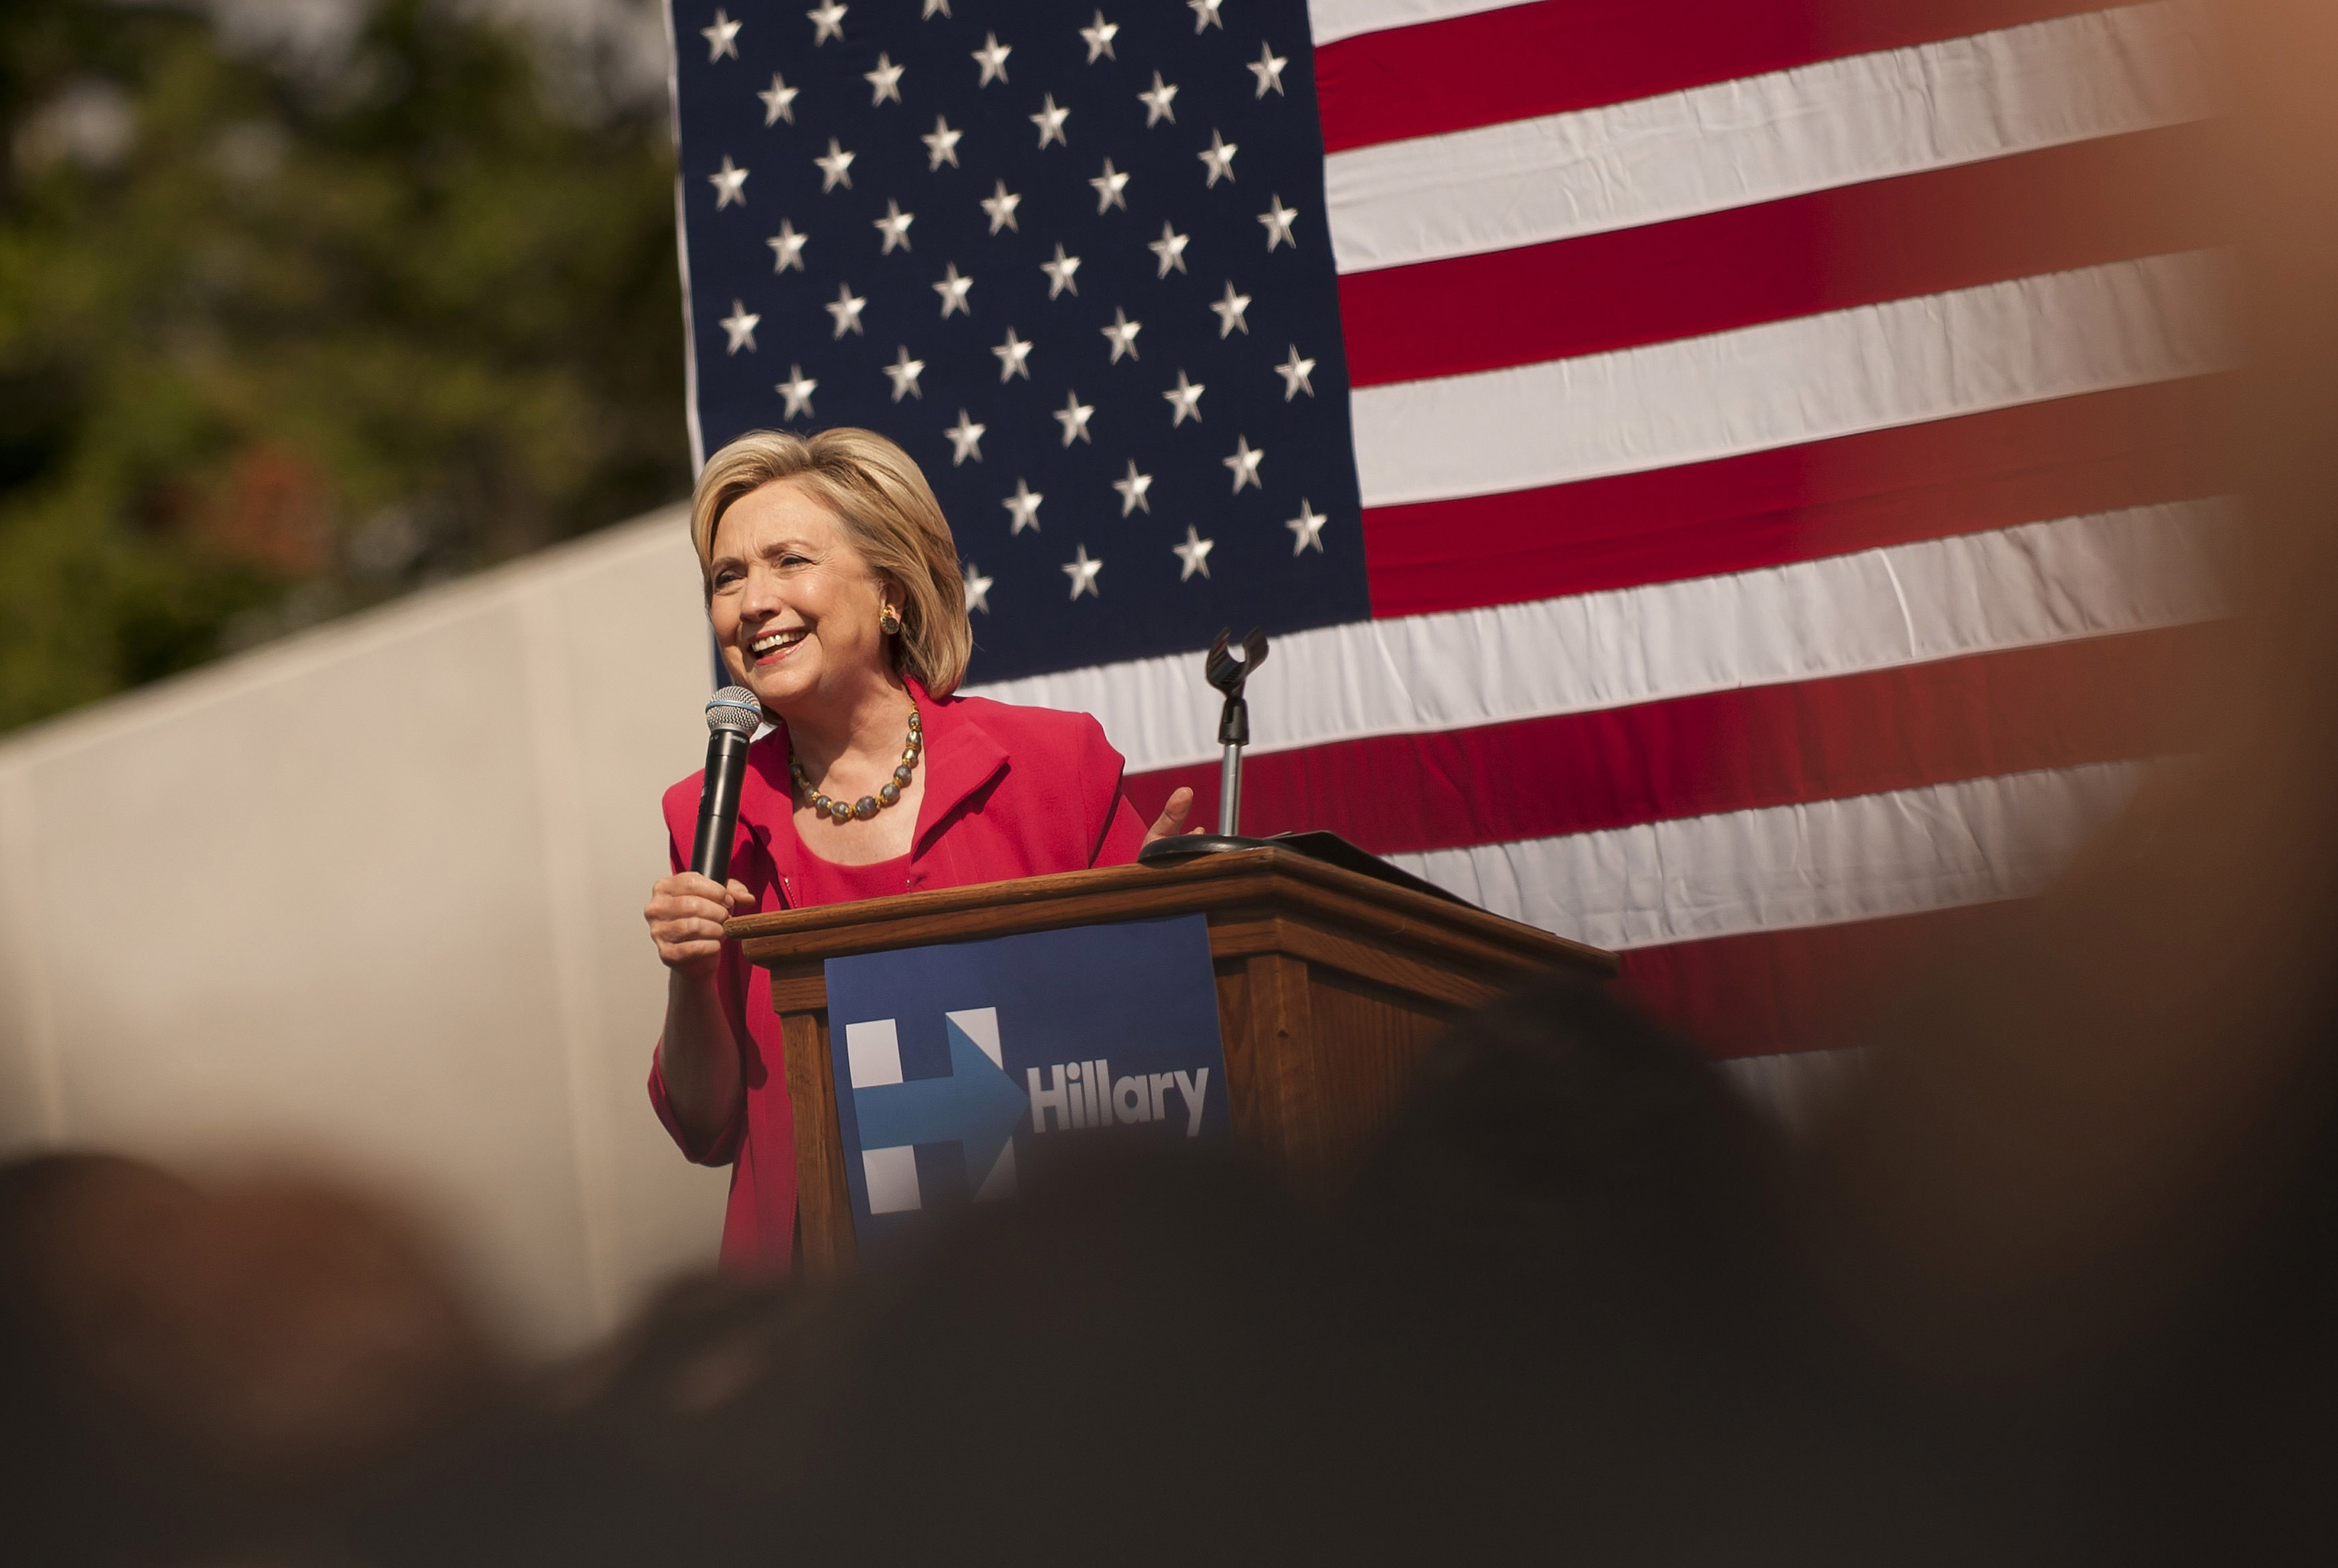 Democratic presidential candidate Hillary Clinton speaks to guests gathered for a campaign meeting on the campus of Case Western Reserve University on August 27, 2015 in Cleveland, Ohio. (Jeff Swensen&mdash;2015 Getty Images)